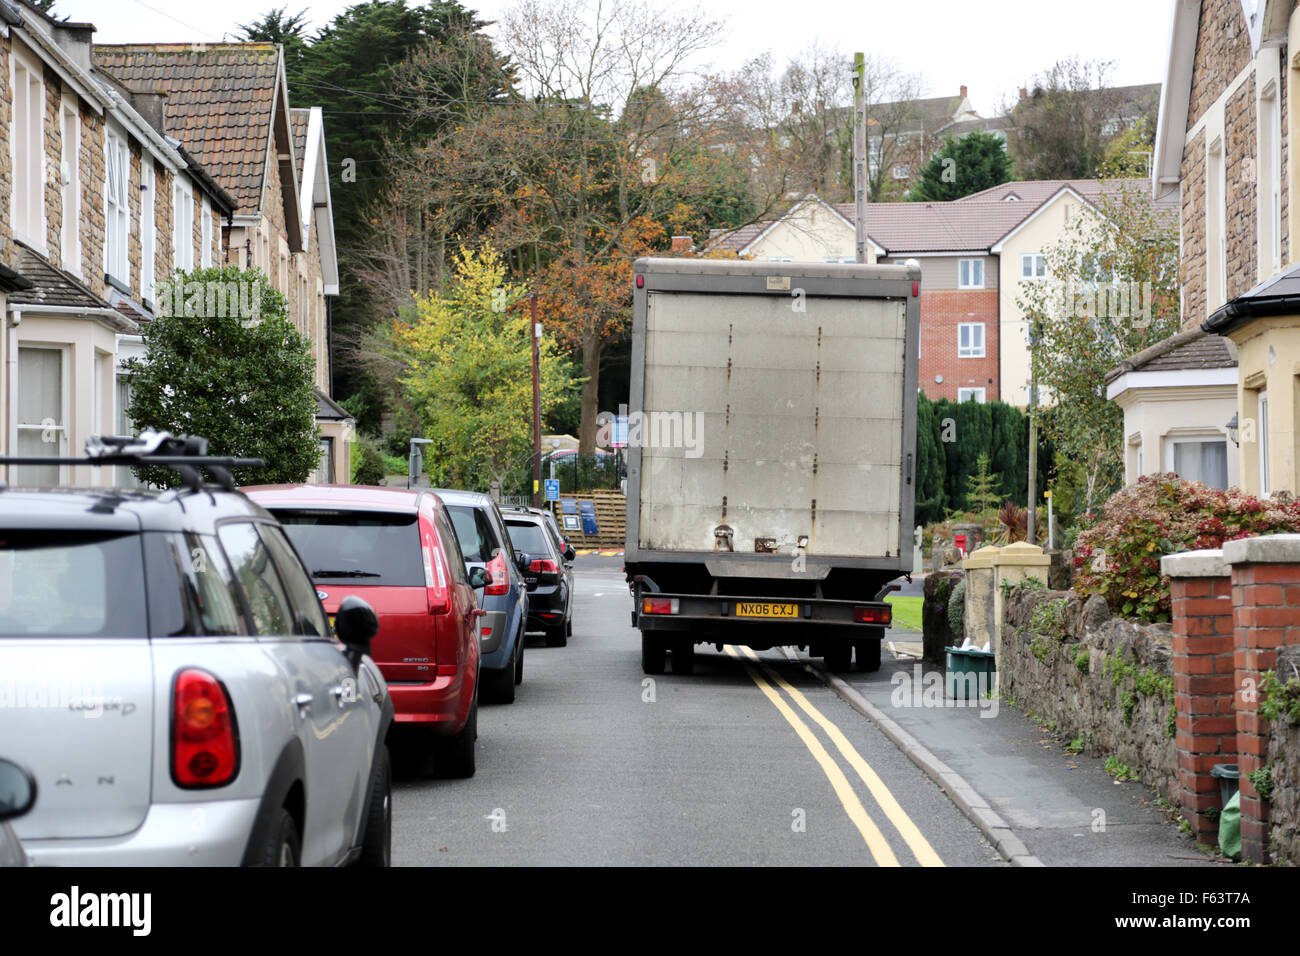 A lorry is forced to drive on the pavement or mount the kerb to pass parked cars on a narrow British street. The road is in a residential area Stock Photo